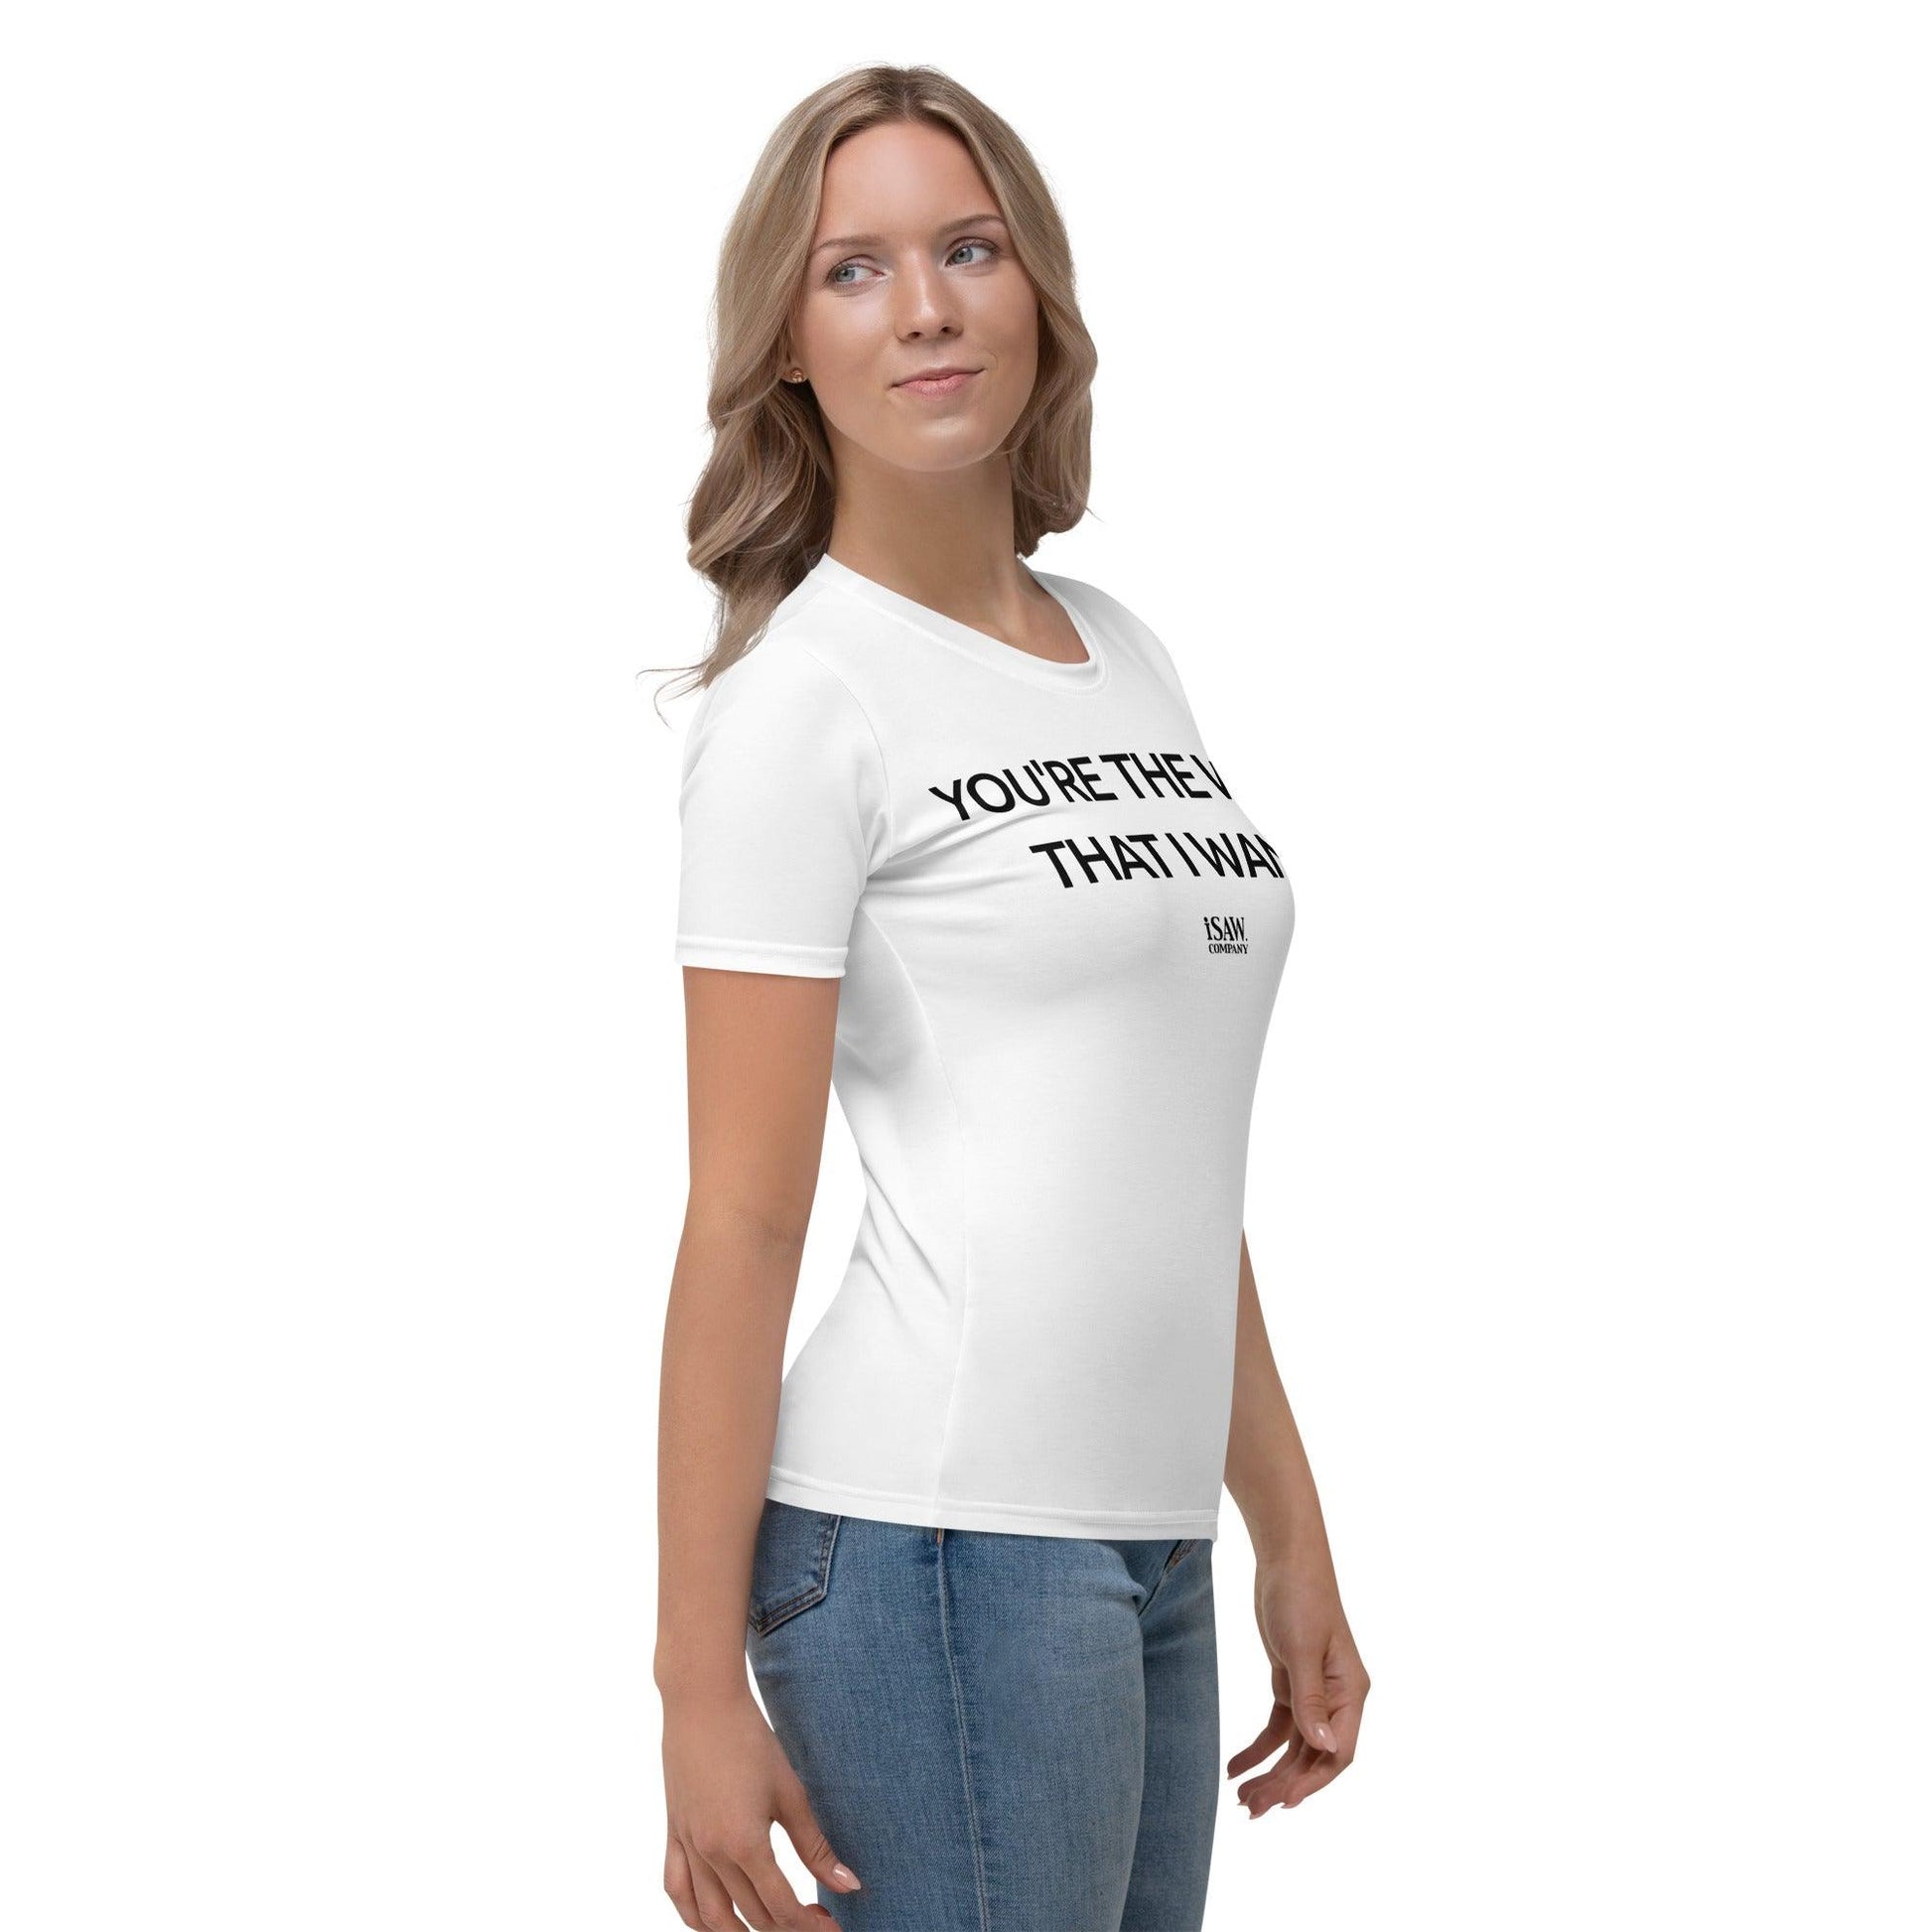 You’re The Wine That I Want - Womens White T-Shirt - iSAW Company